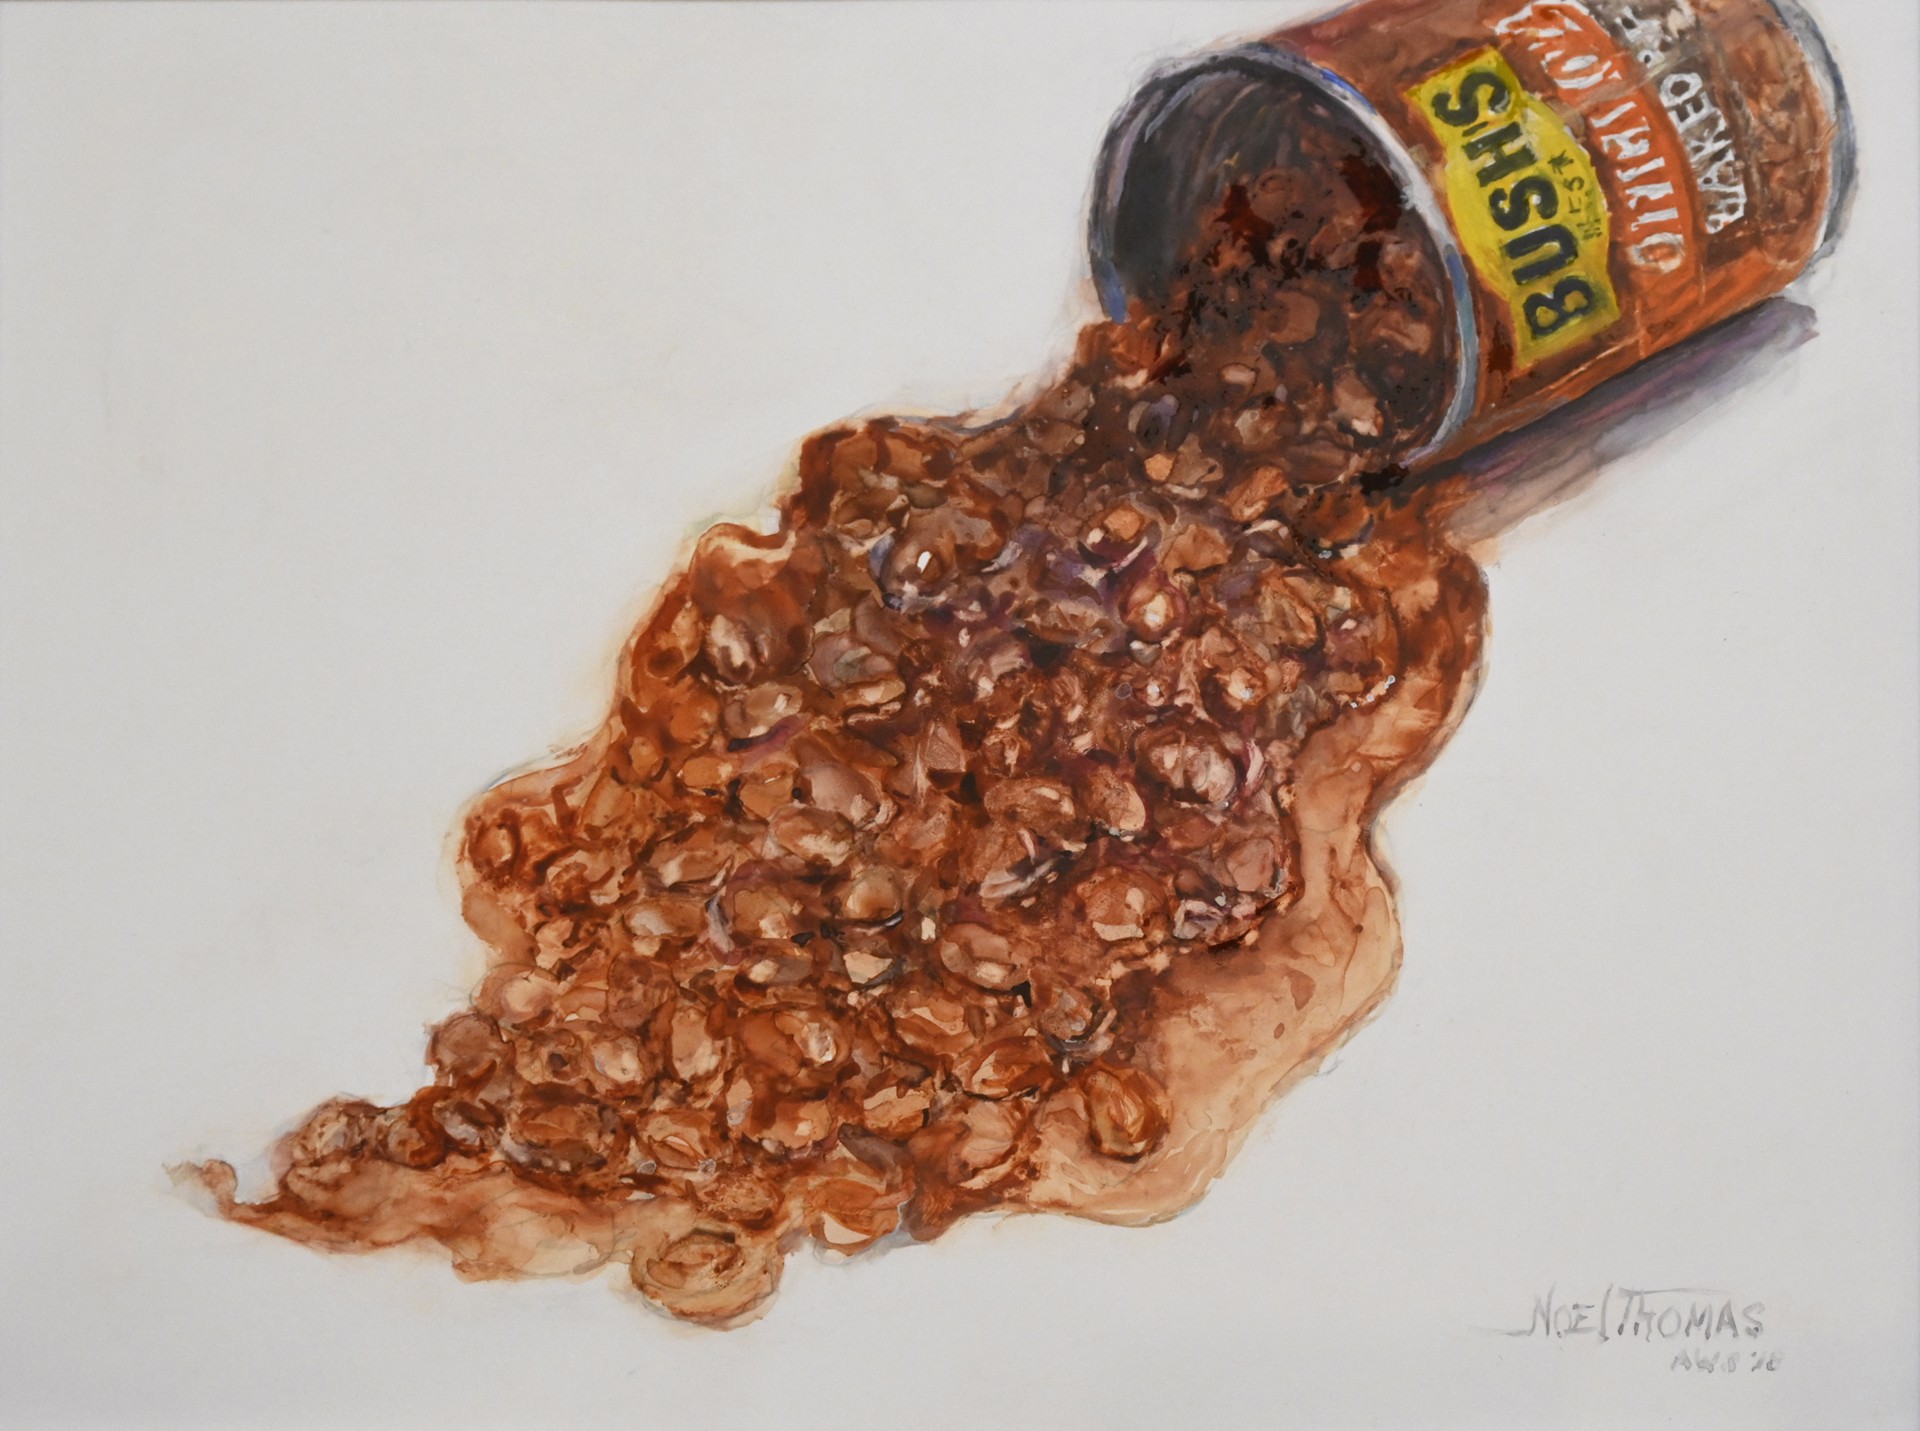 Who Spilled the Beans? by Noel Thomas